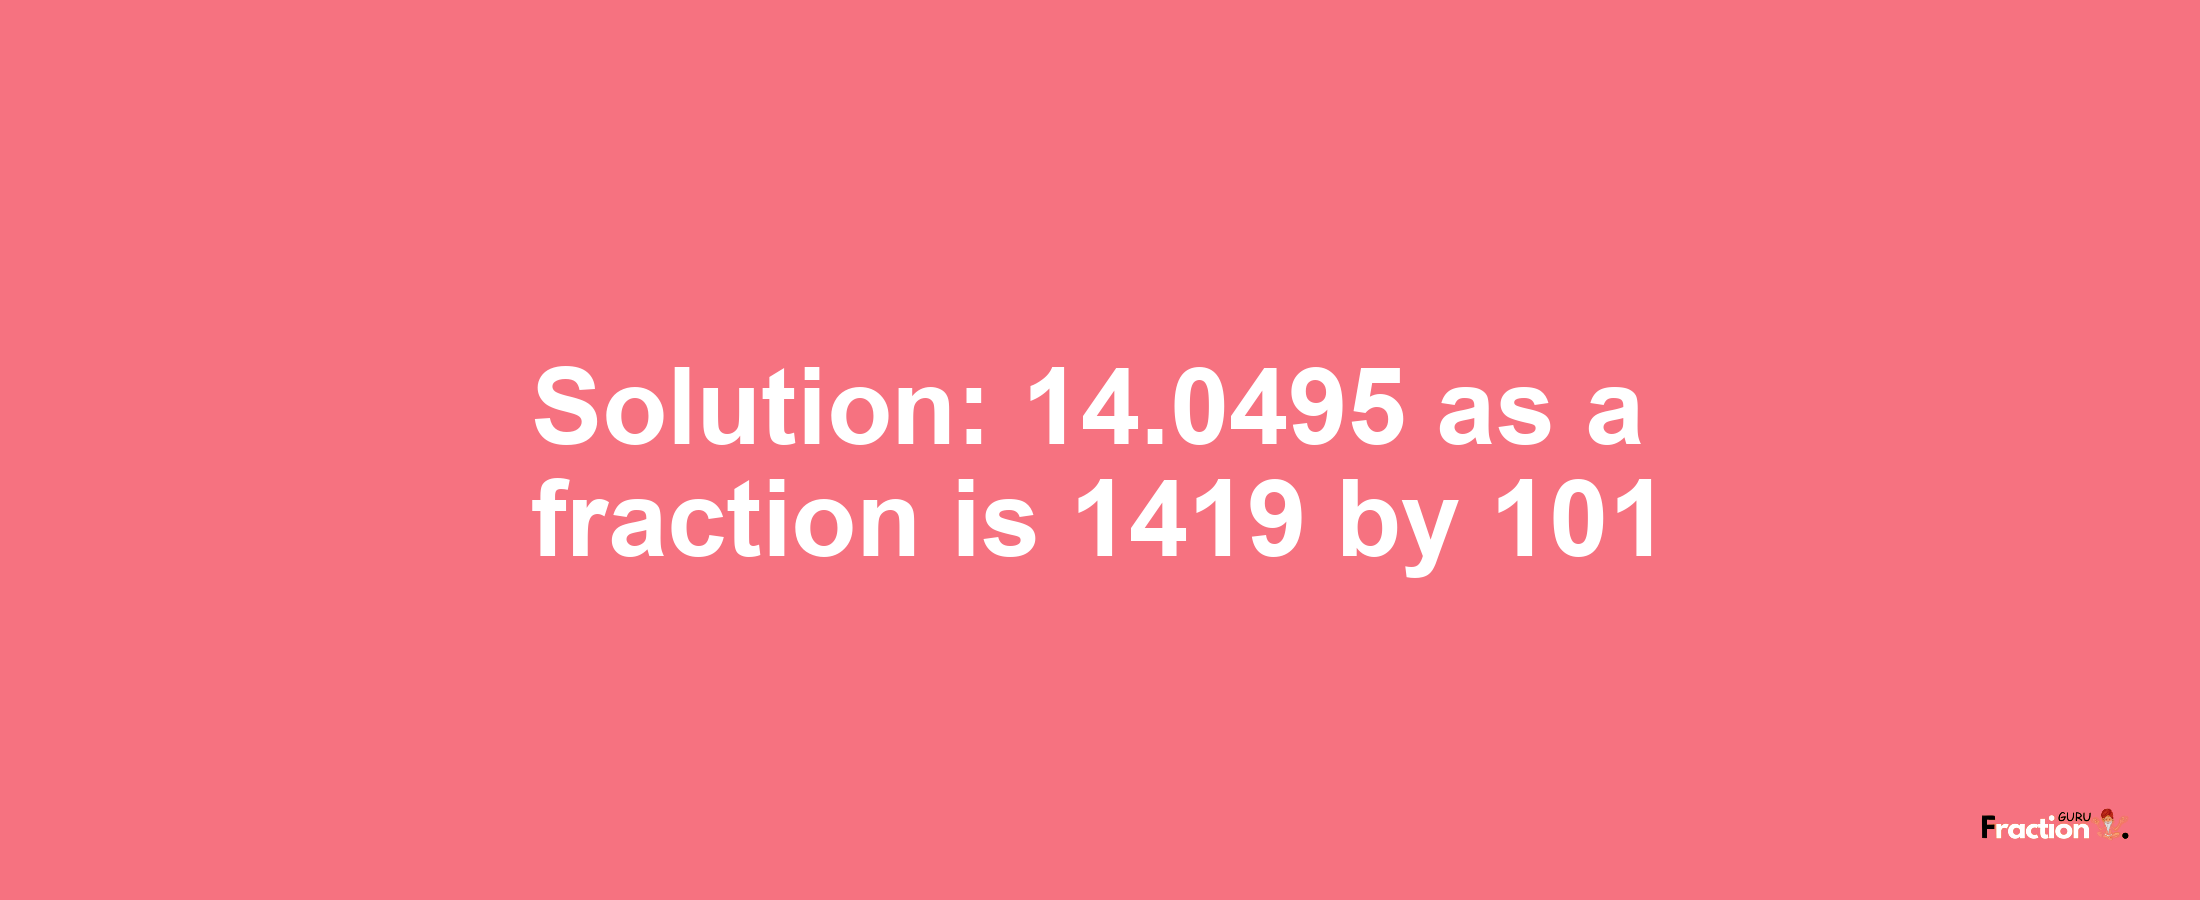 Solution:14.0495 as a fraction is 1419/101